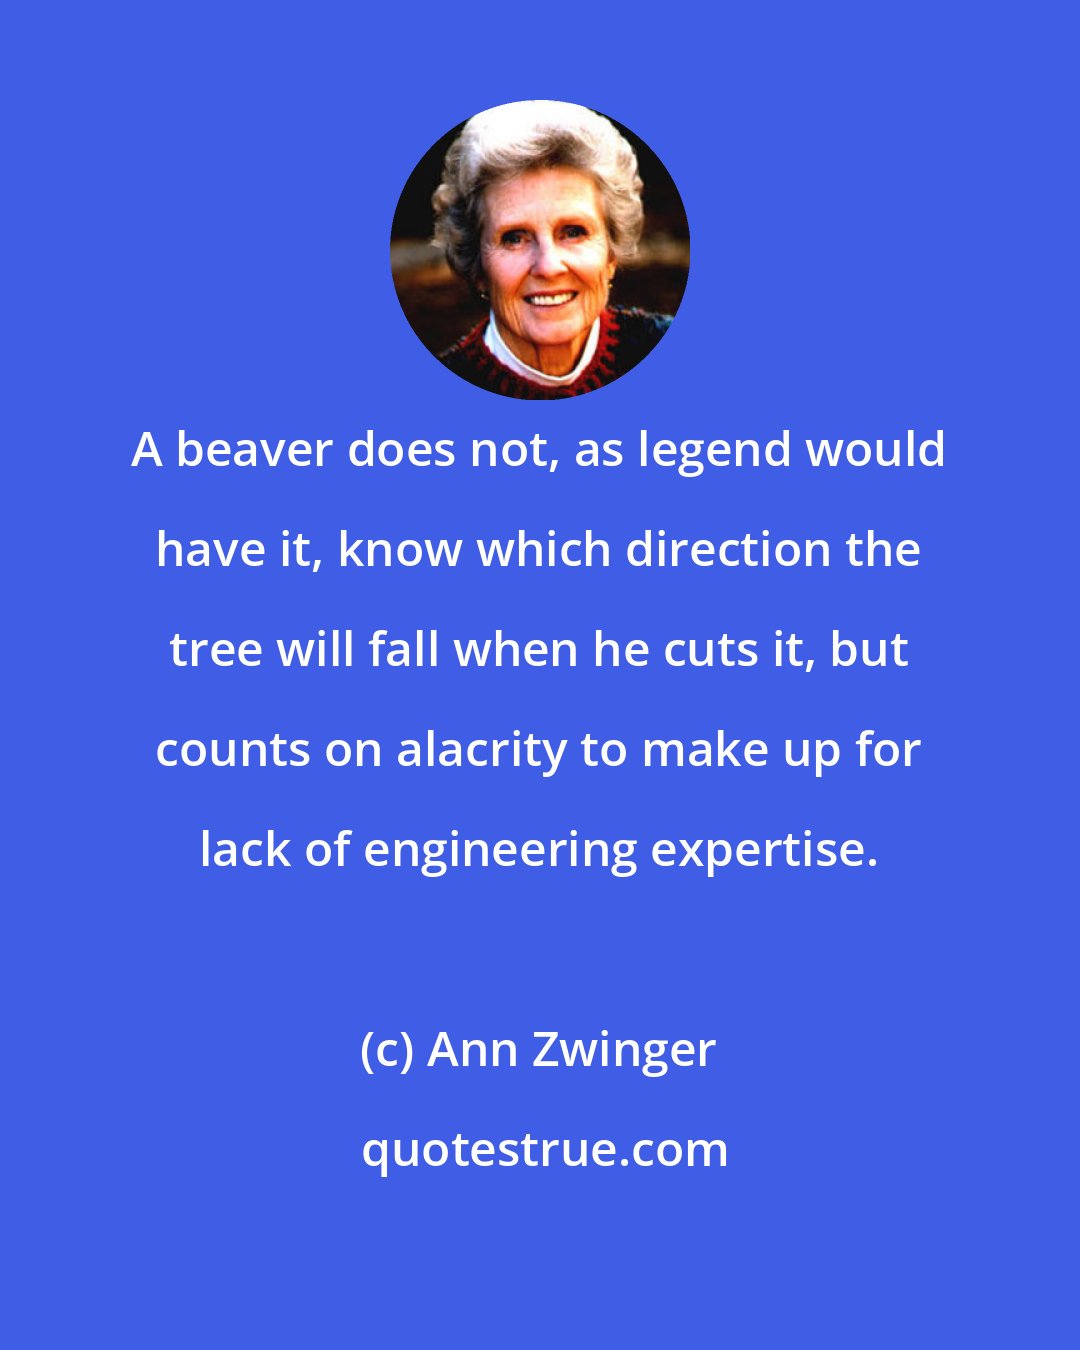 Ann Zwinger: A beaver does not, as legend would have it, know which direction the tree will fall when he cuts it, but counts on alacrity to make up for lack of engineering expertise.